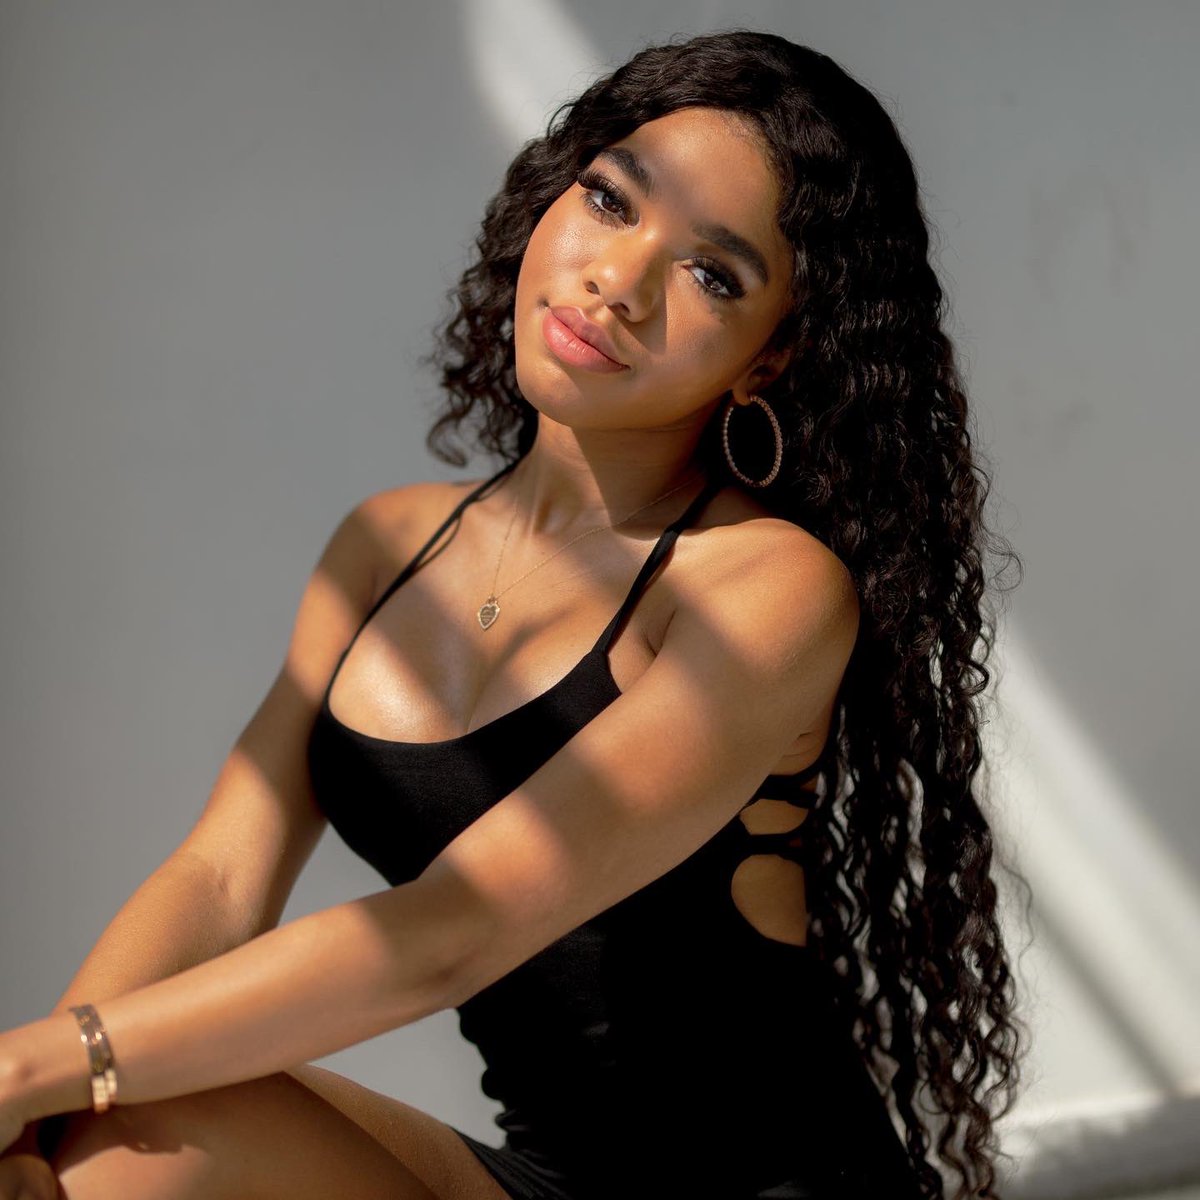 8 Things You Didn't Know About Teala Dunn